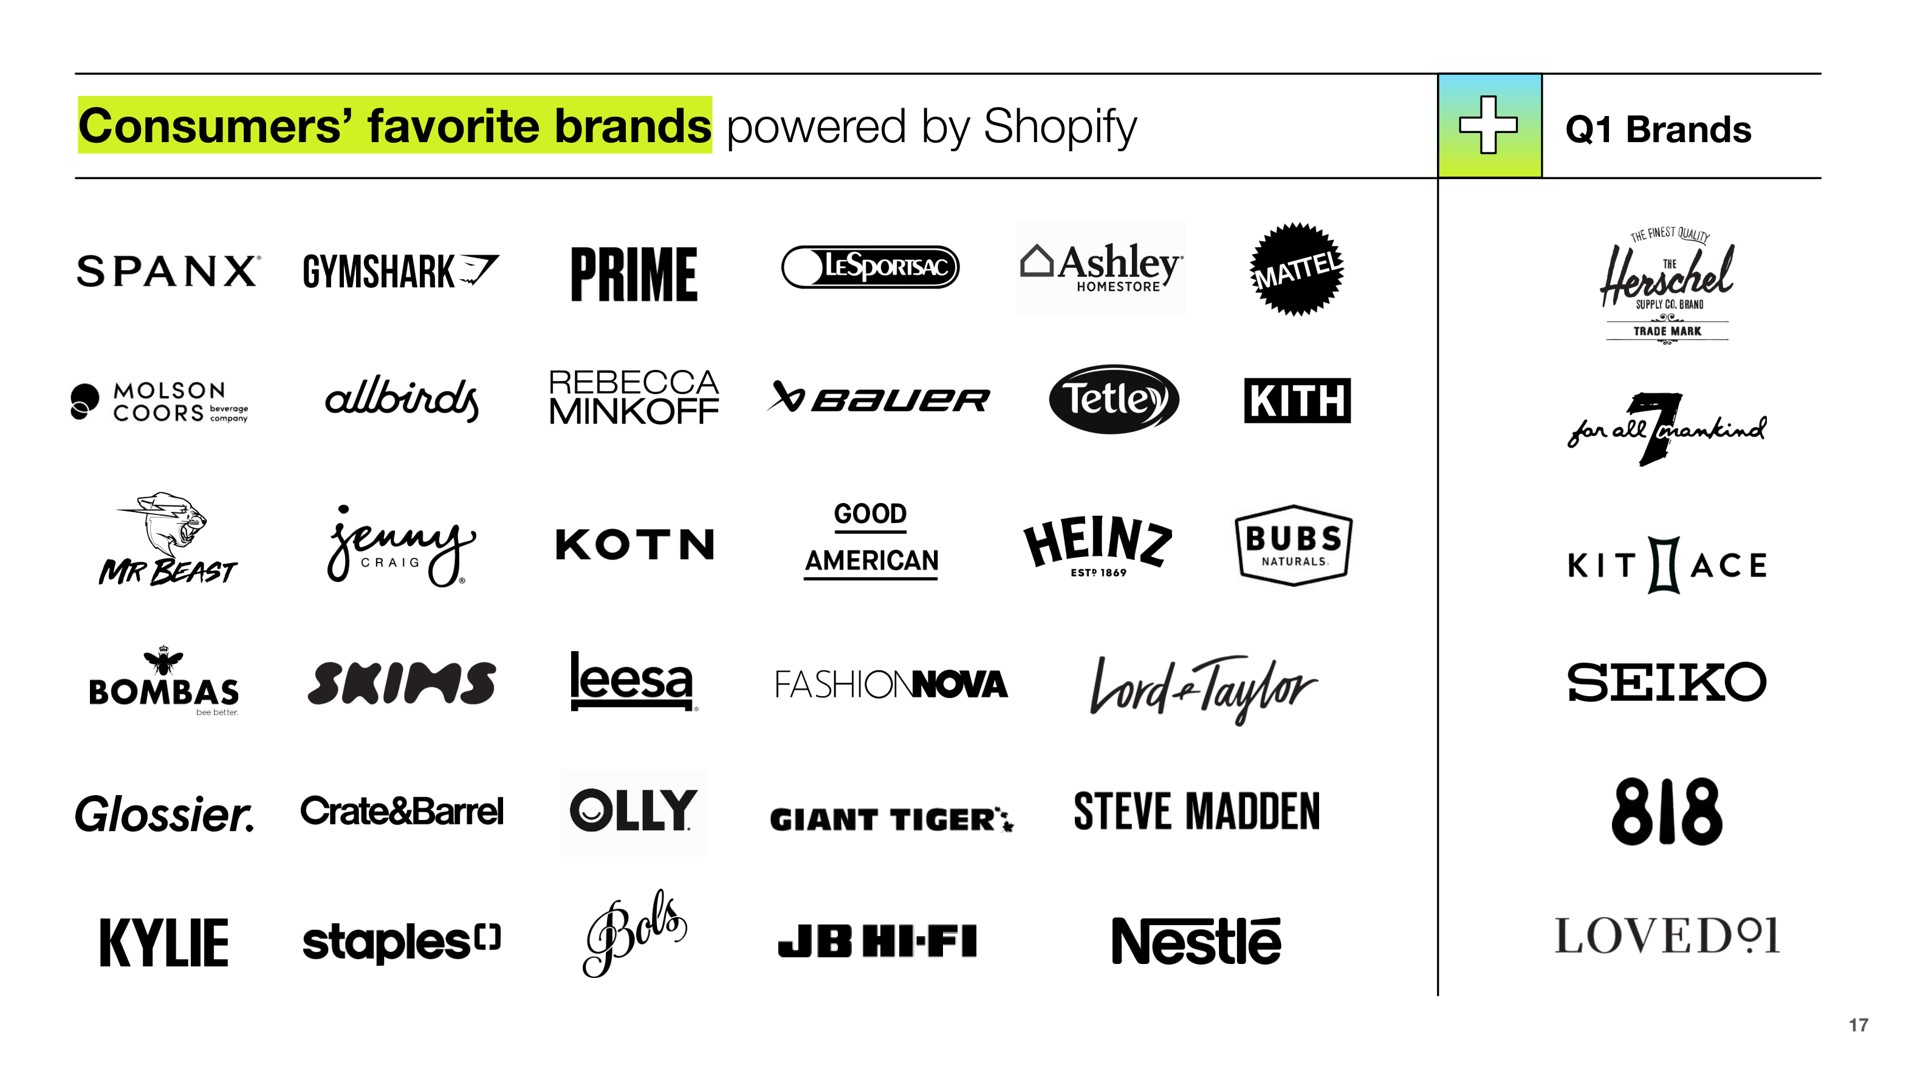 consumers favorite brands powered by prime mil nee coop skip crate madden ace staples go nestle loved | Shopify